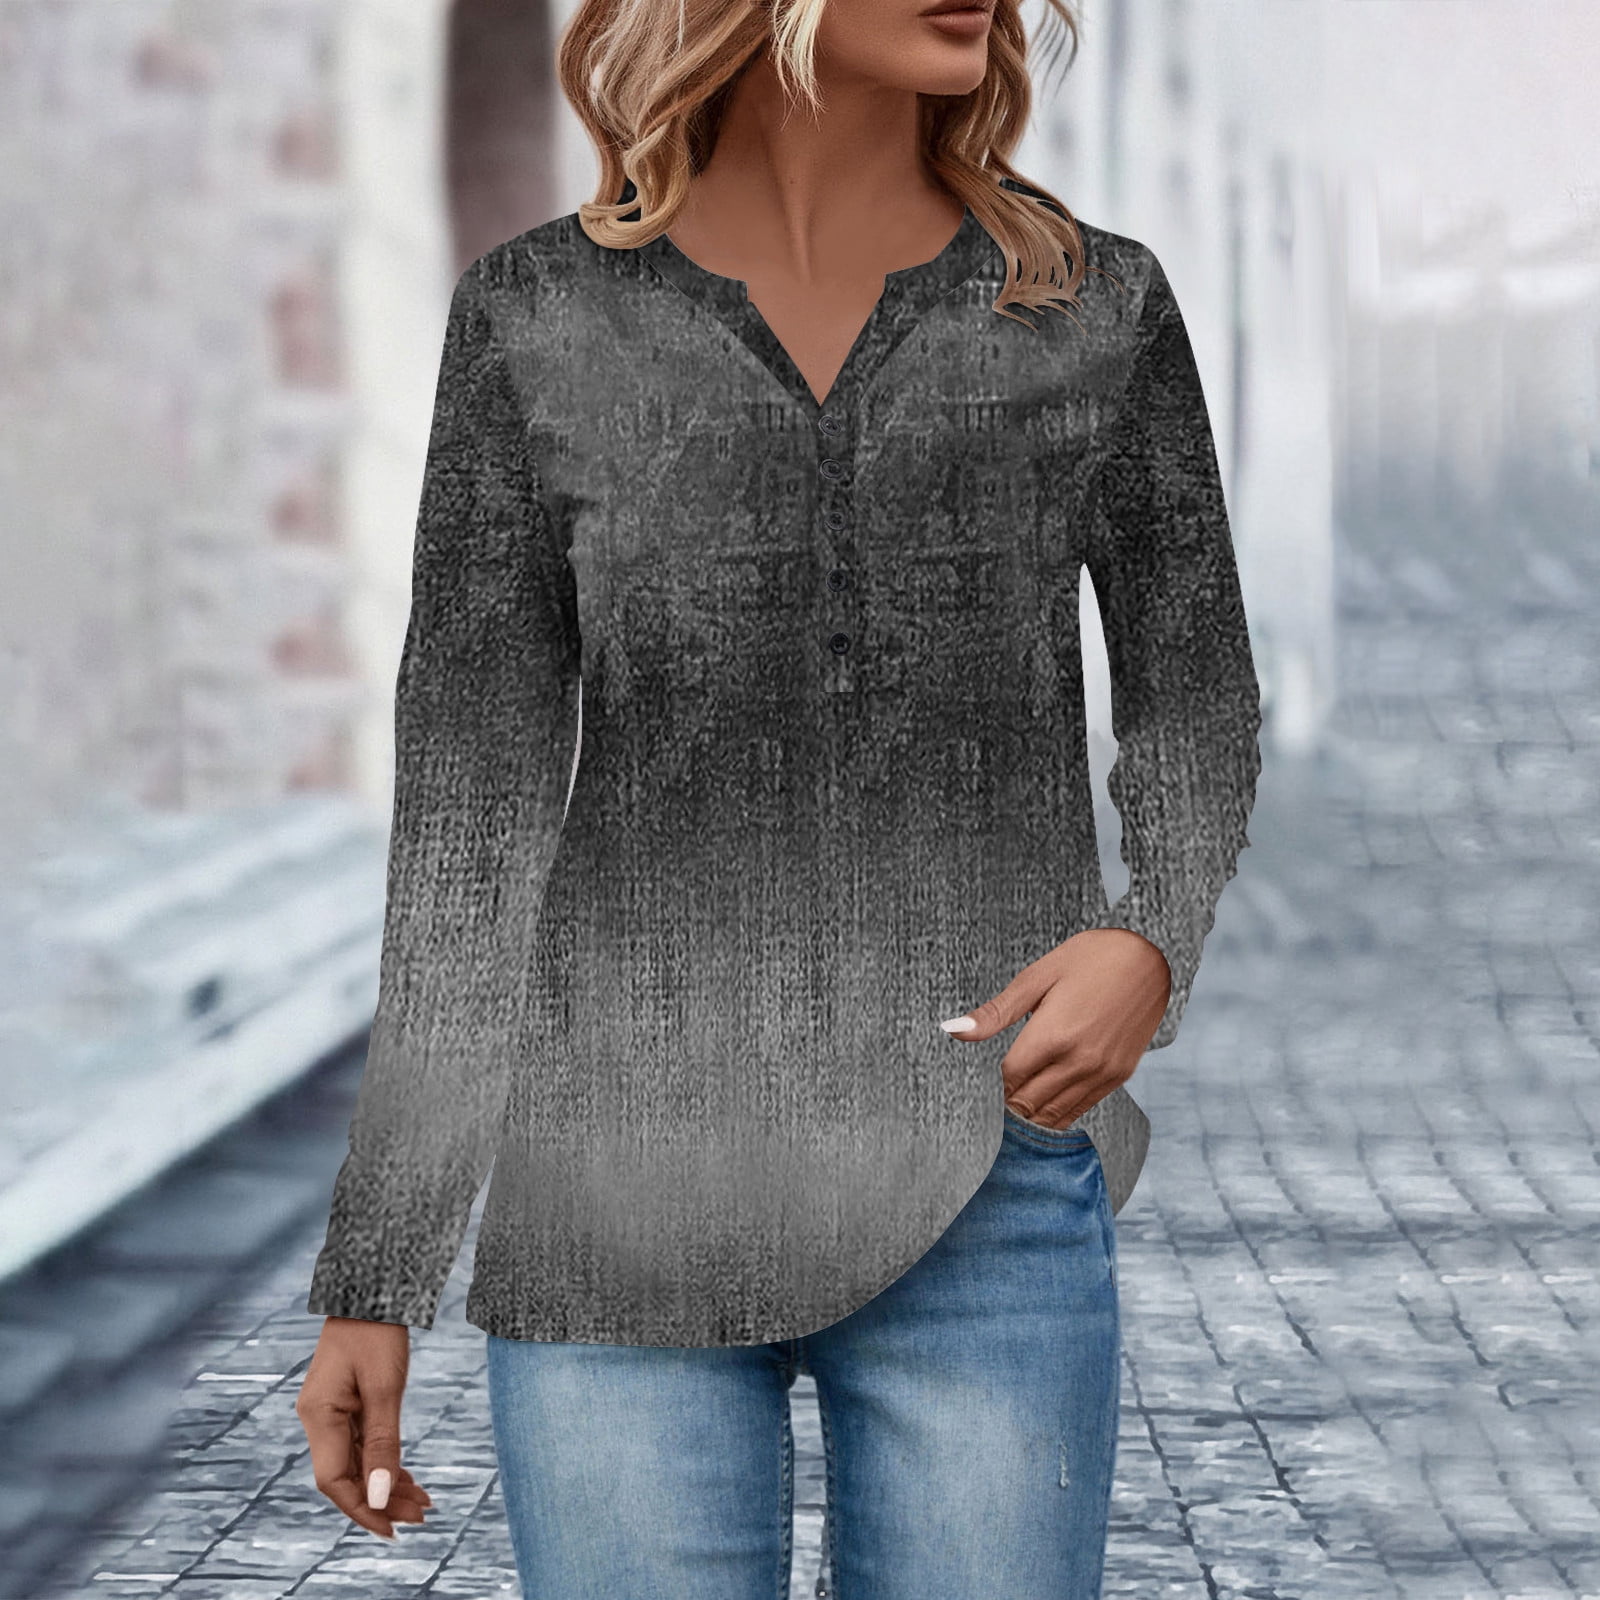  Womens Tops,Going Out Tops for Women Fashion Floral Printed  Long Sleeve Tops Vintage Business Casual Plus Size Loose Round Neck  Pullover Shirt Fall Outfits for Women Light Gray S : Clothing